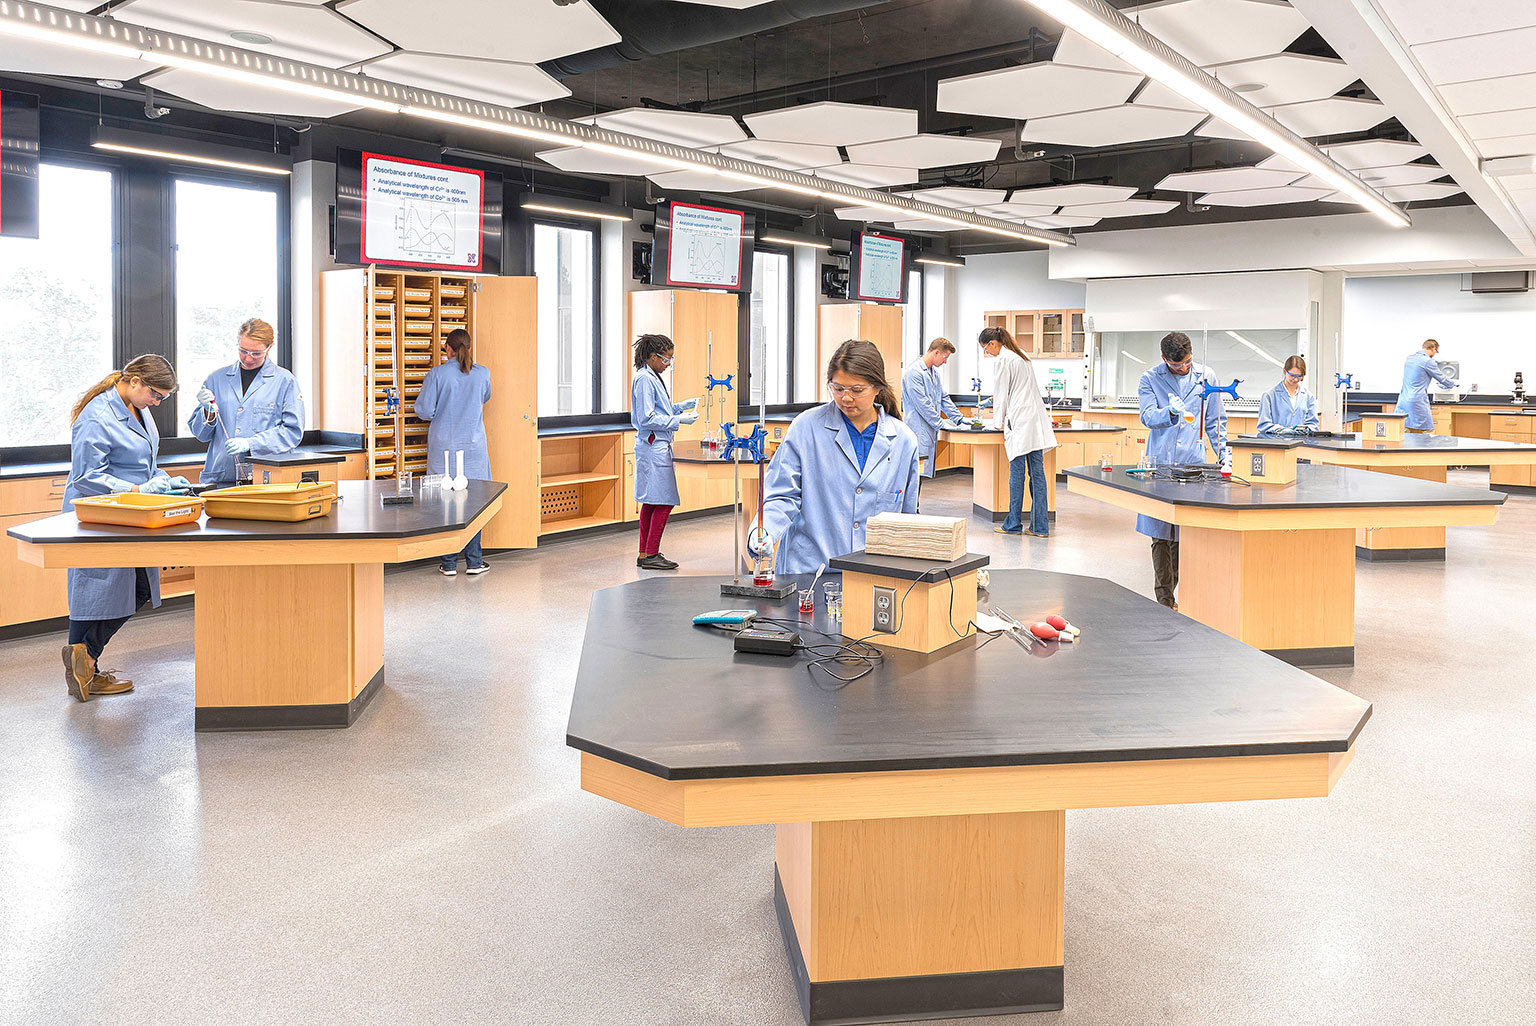 1. Students work in open lab space with clear walkways between diamond shaped workstations